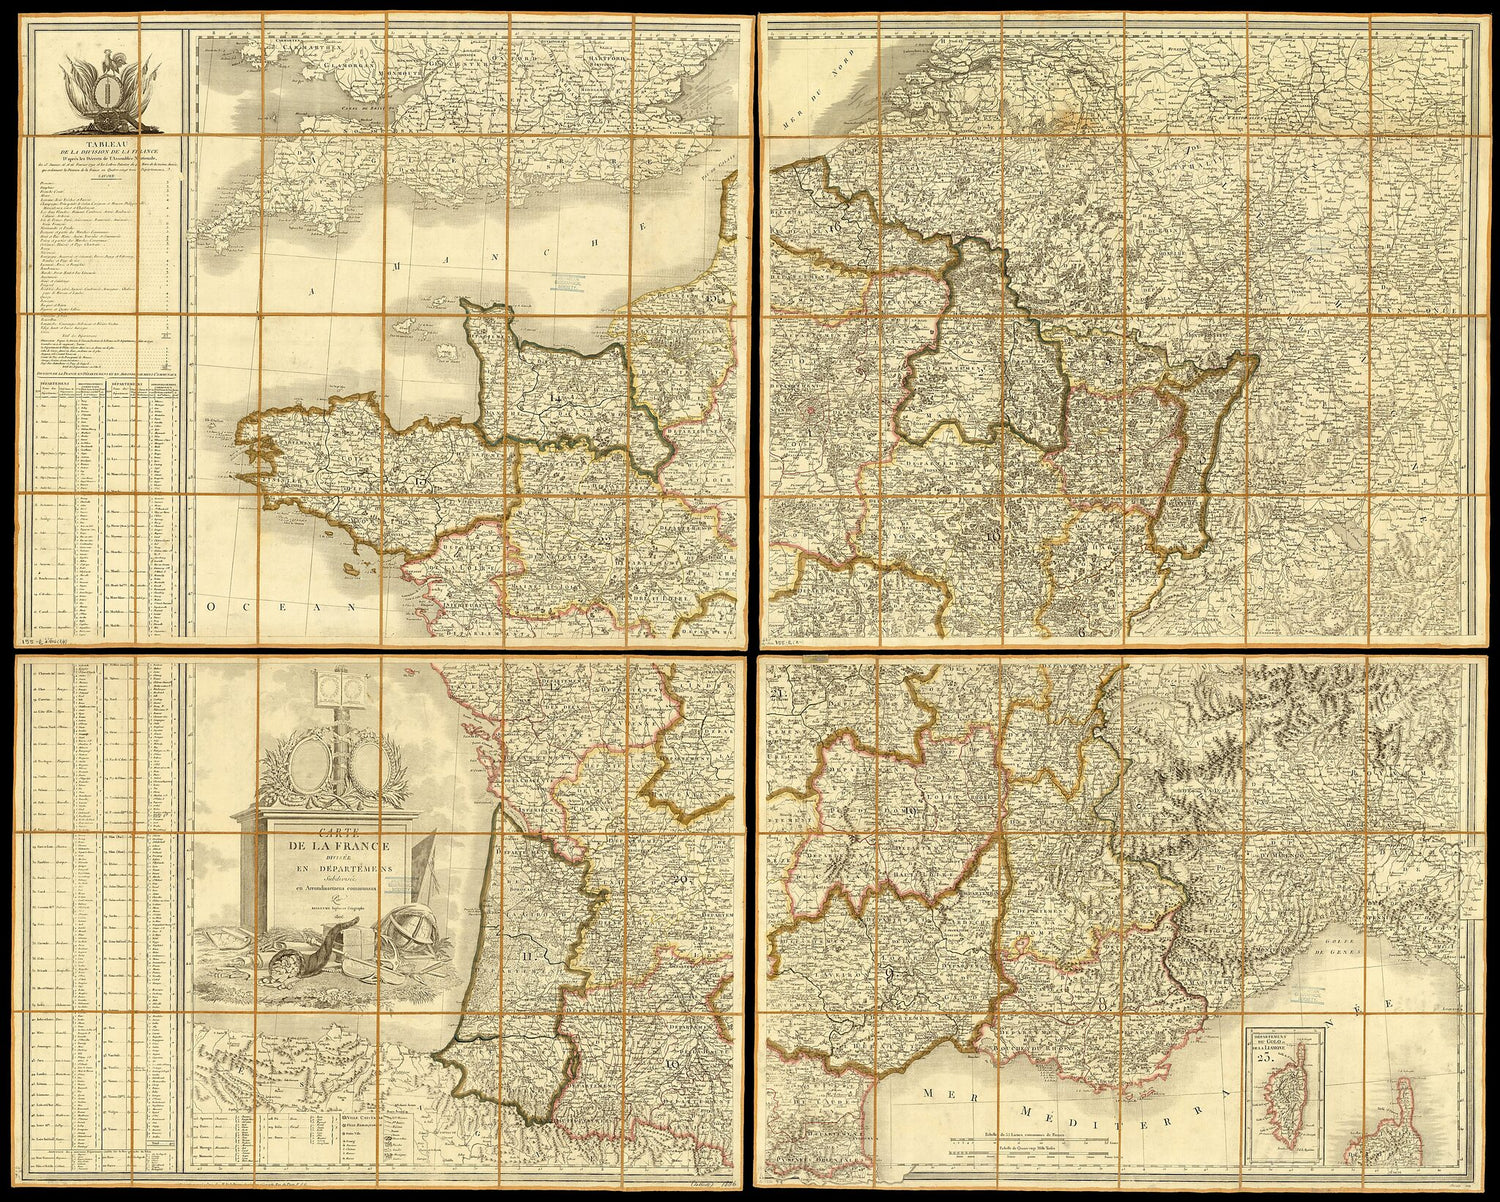 This old map of Map of France Divided Into Départements, Subdivided Into Arrondissements. (Carte De La France Divisée En Départemens, Subdivisée En Arrondissemens Communaux) from 1806 was created by Le Père Barrière, Pierre De Belleyme in 1806